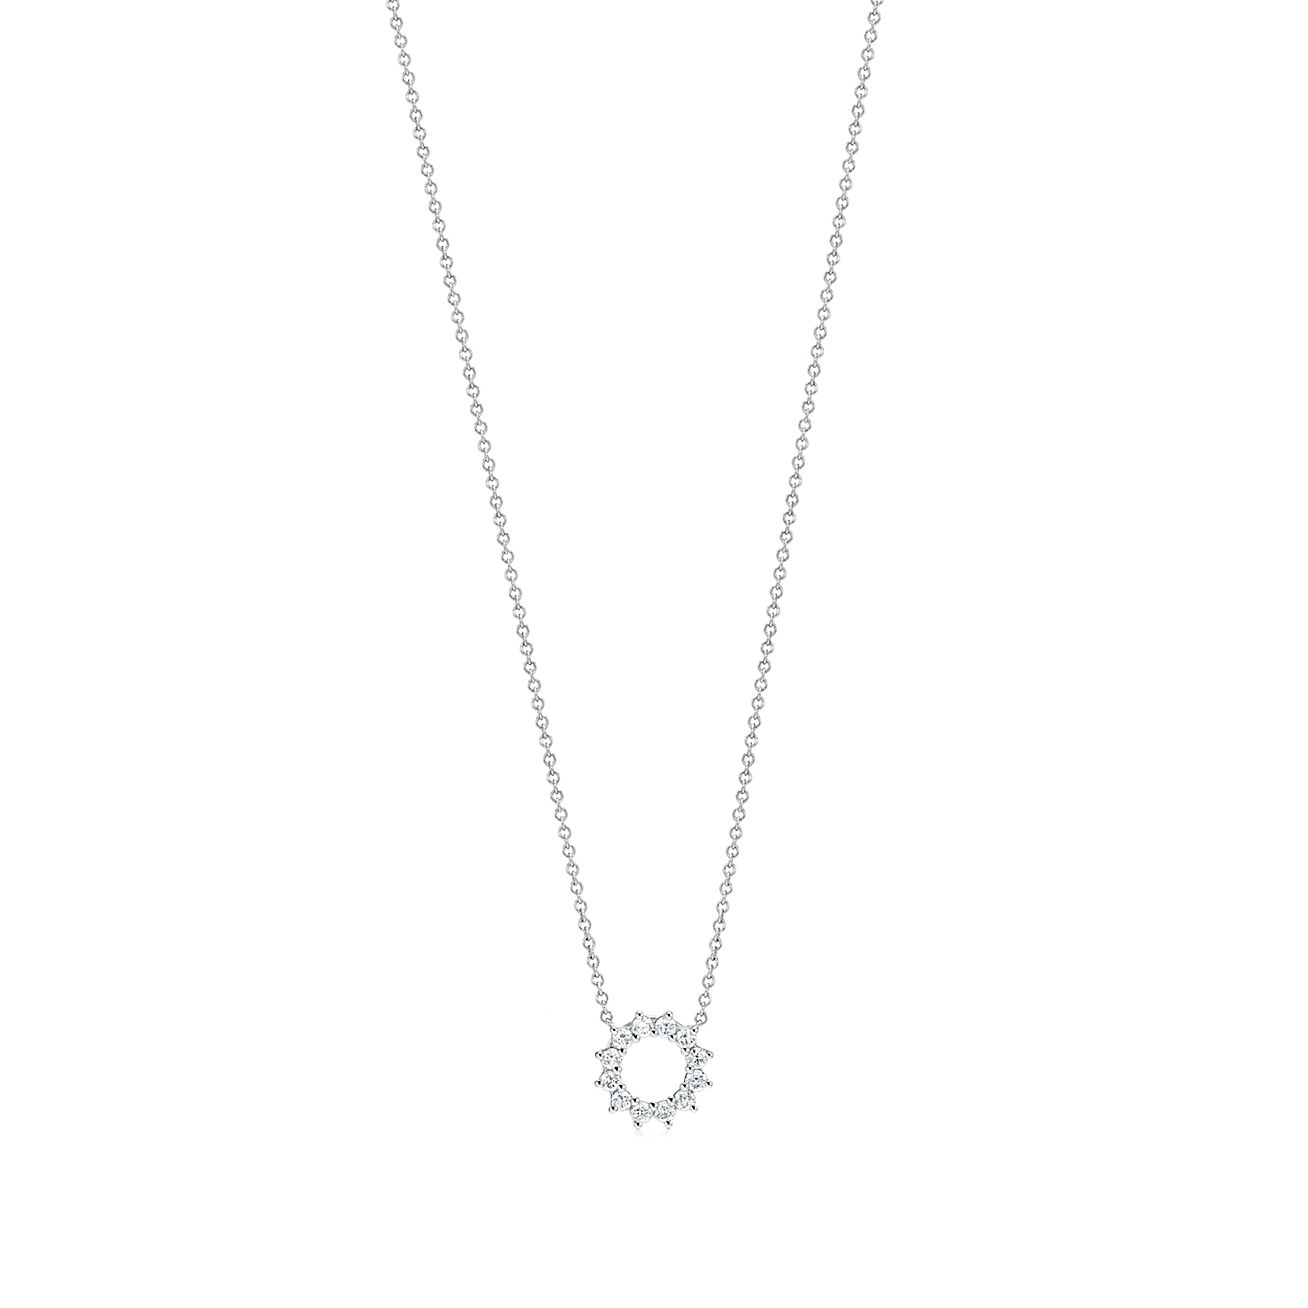 Open circle pendant in platinum with 